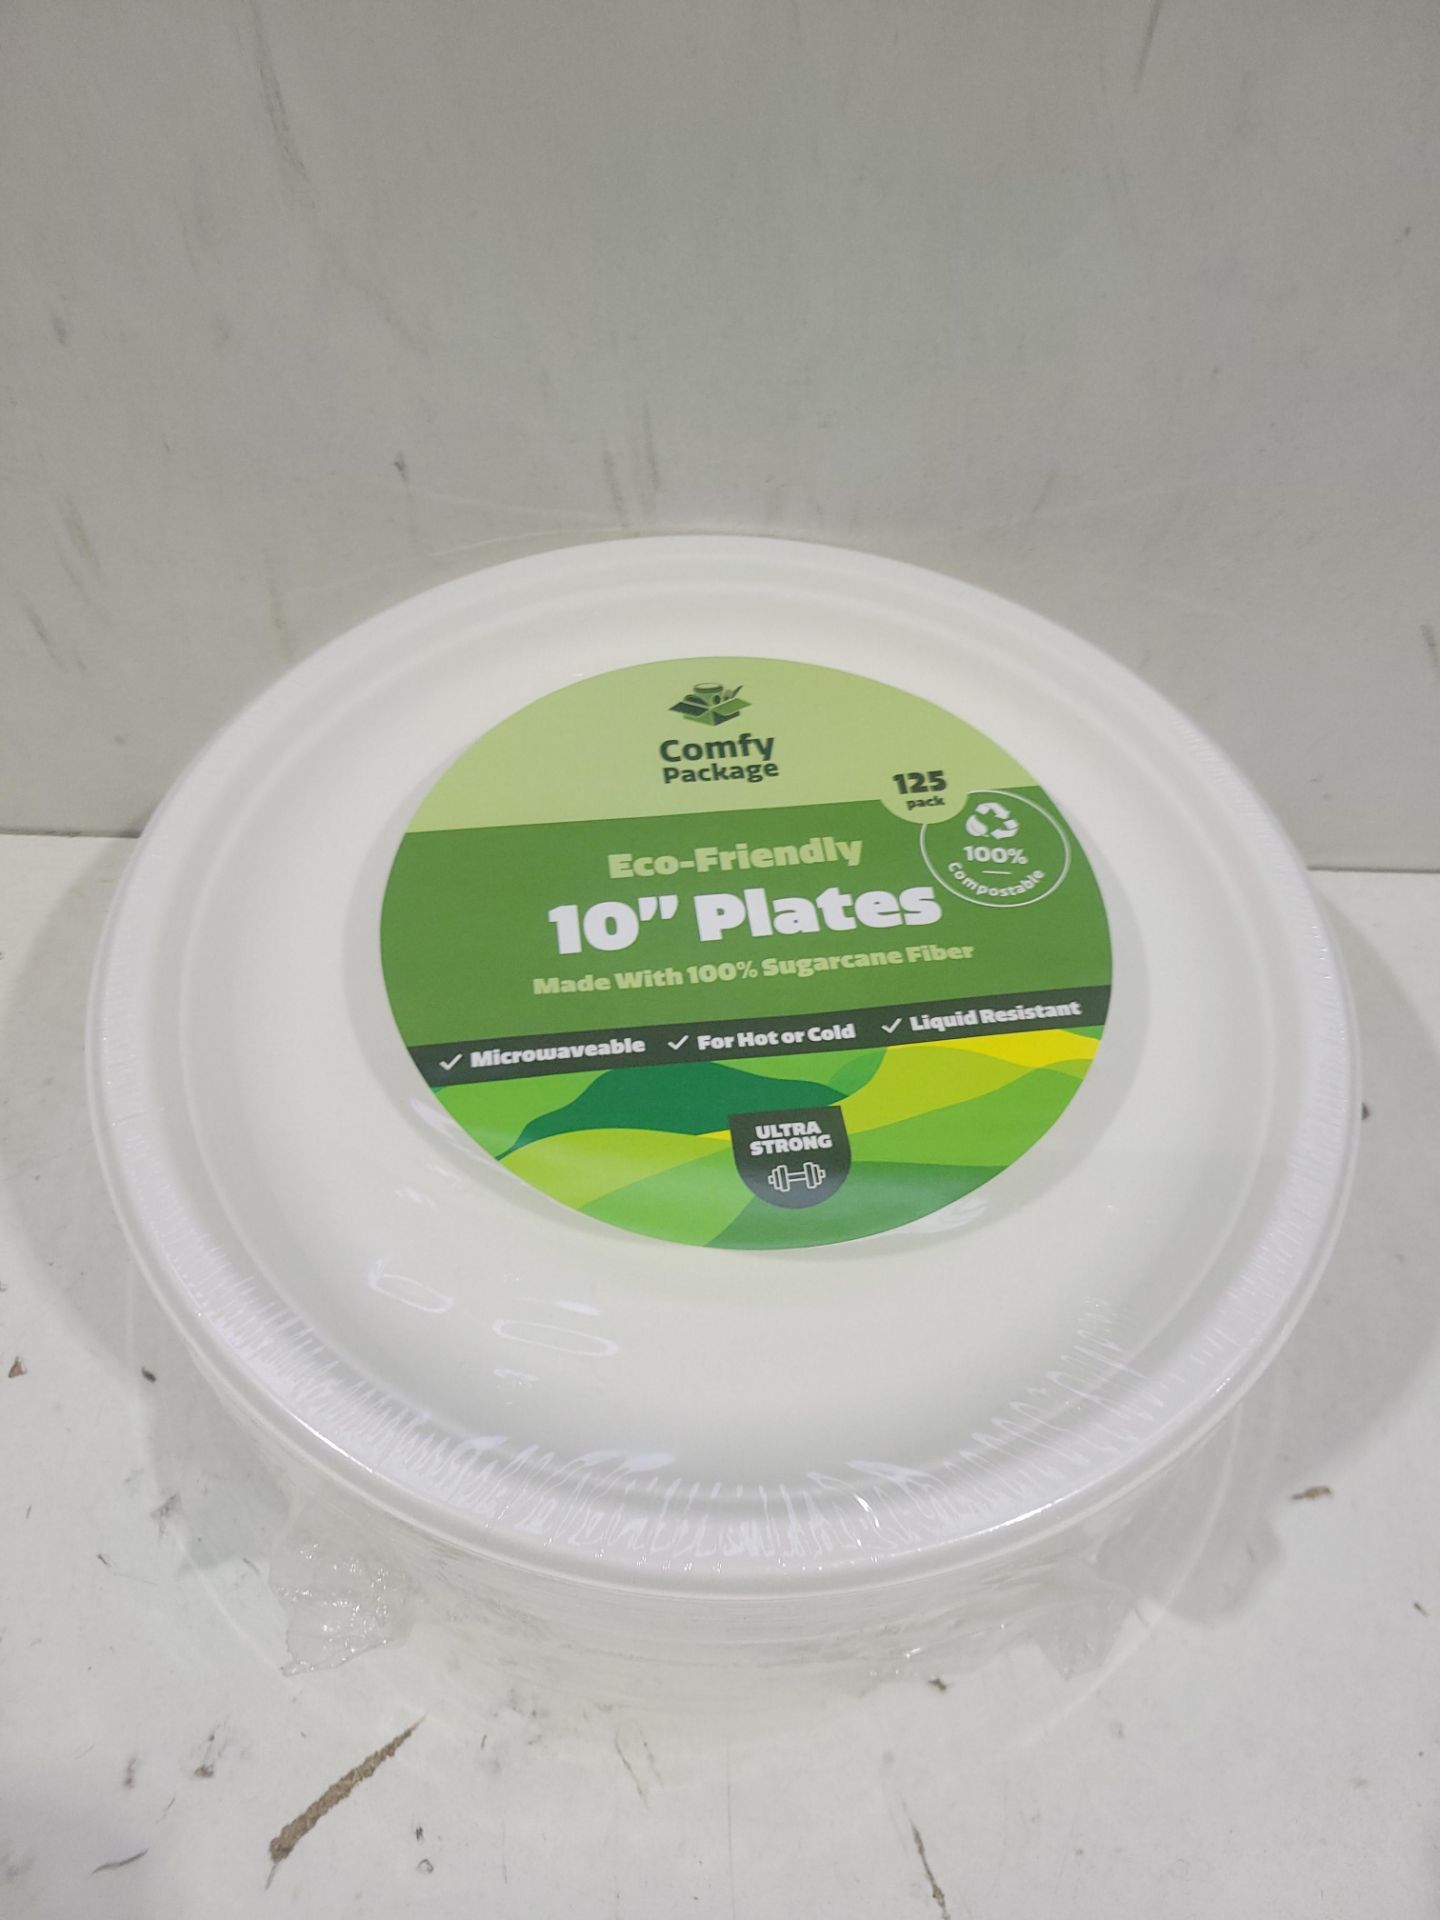 2 ITEMS IN THIS LOT ECO-FRIENDLY 10" PLATES 125 PACK